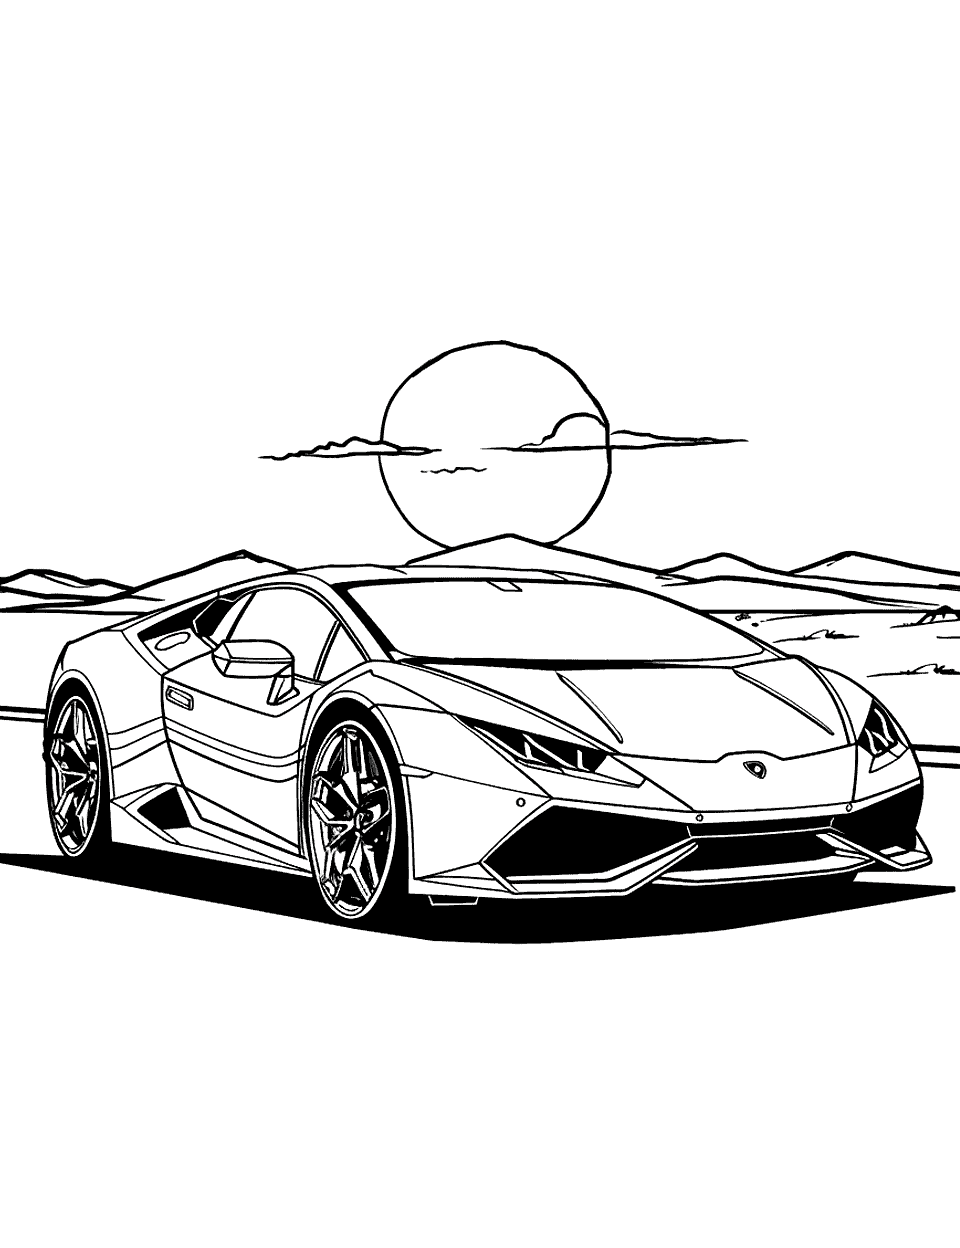 Huracan at Sunrise Lamborghini Coloring Page - A Lamborghini Huracan parked on an open road, with the rising sun in the background.